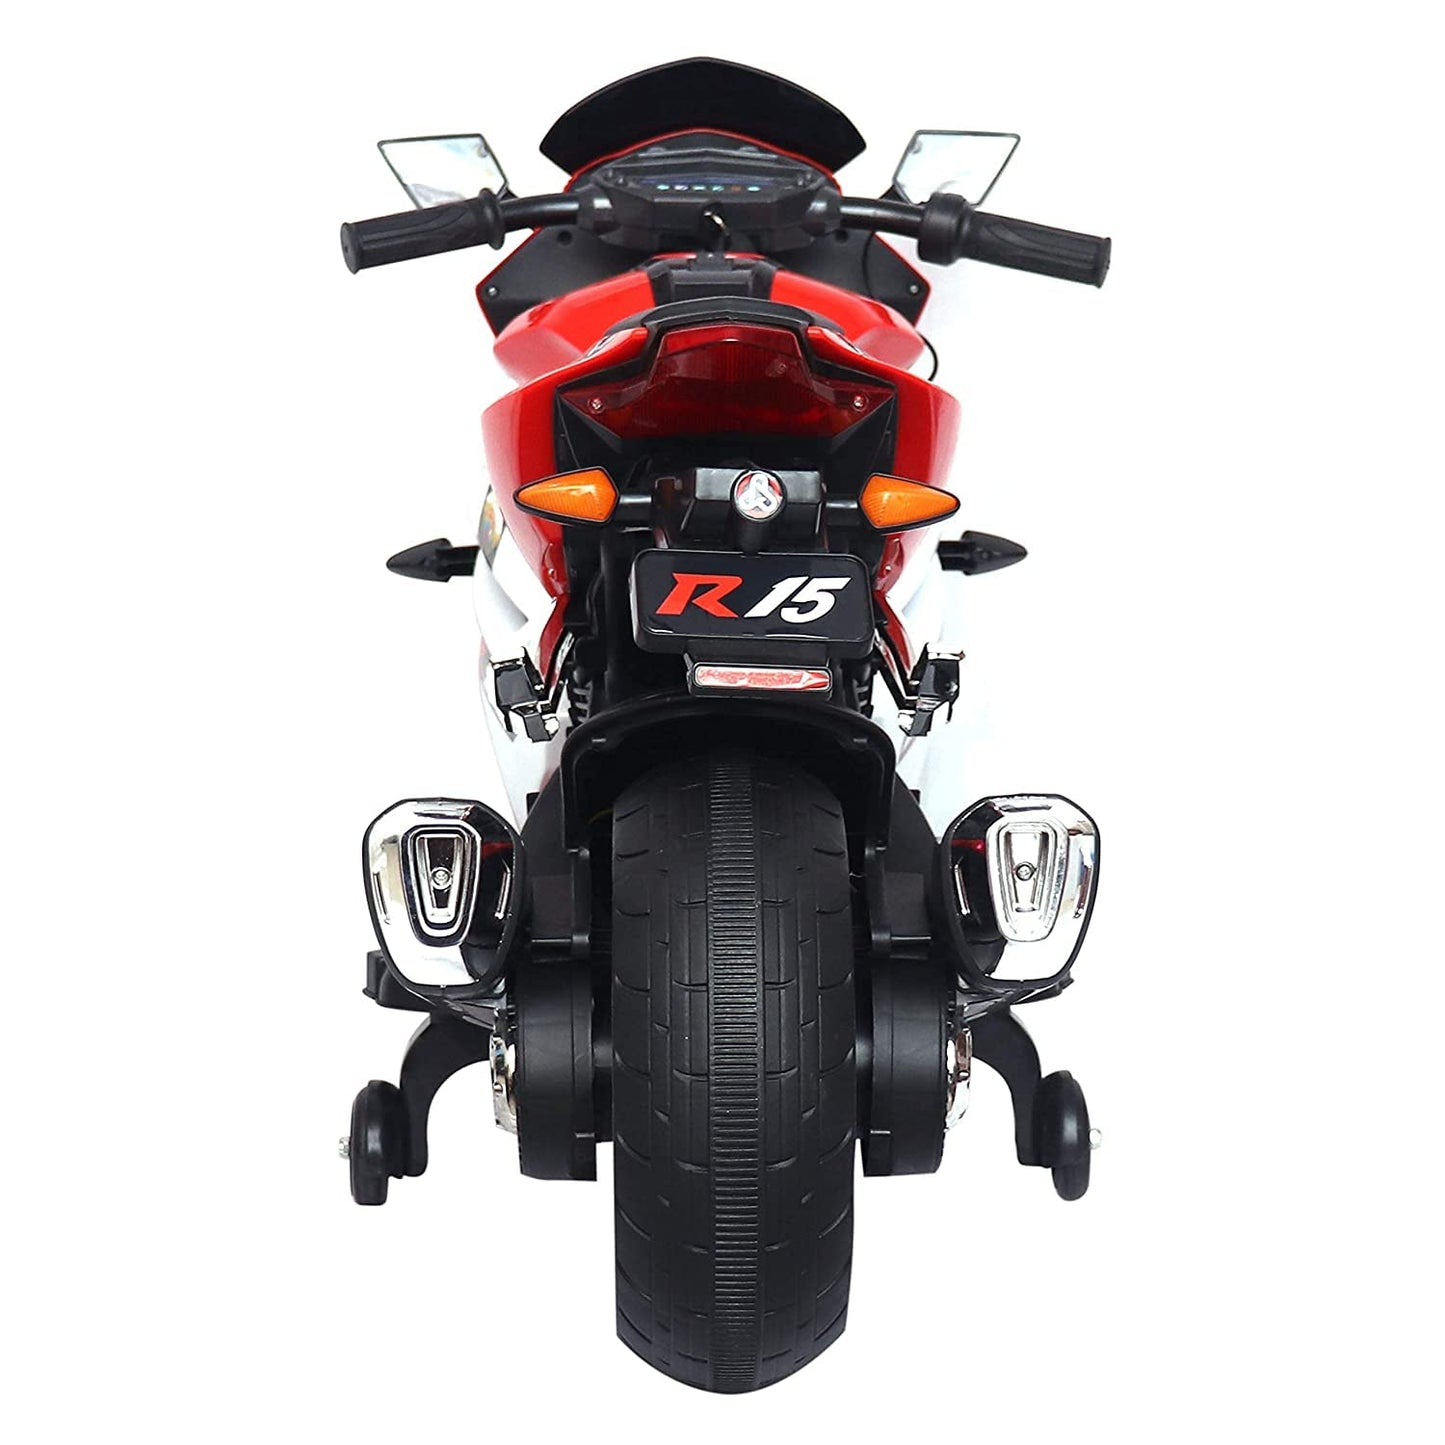 R15 Sports Ride on Bike | Rechargeable Battery | Red | Age :1 Year +